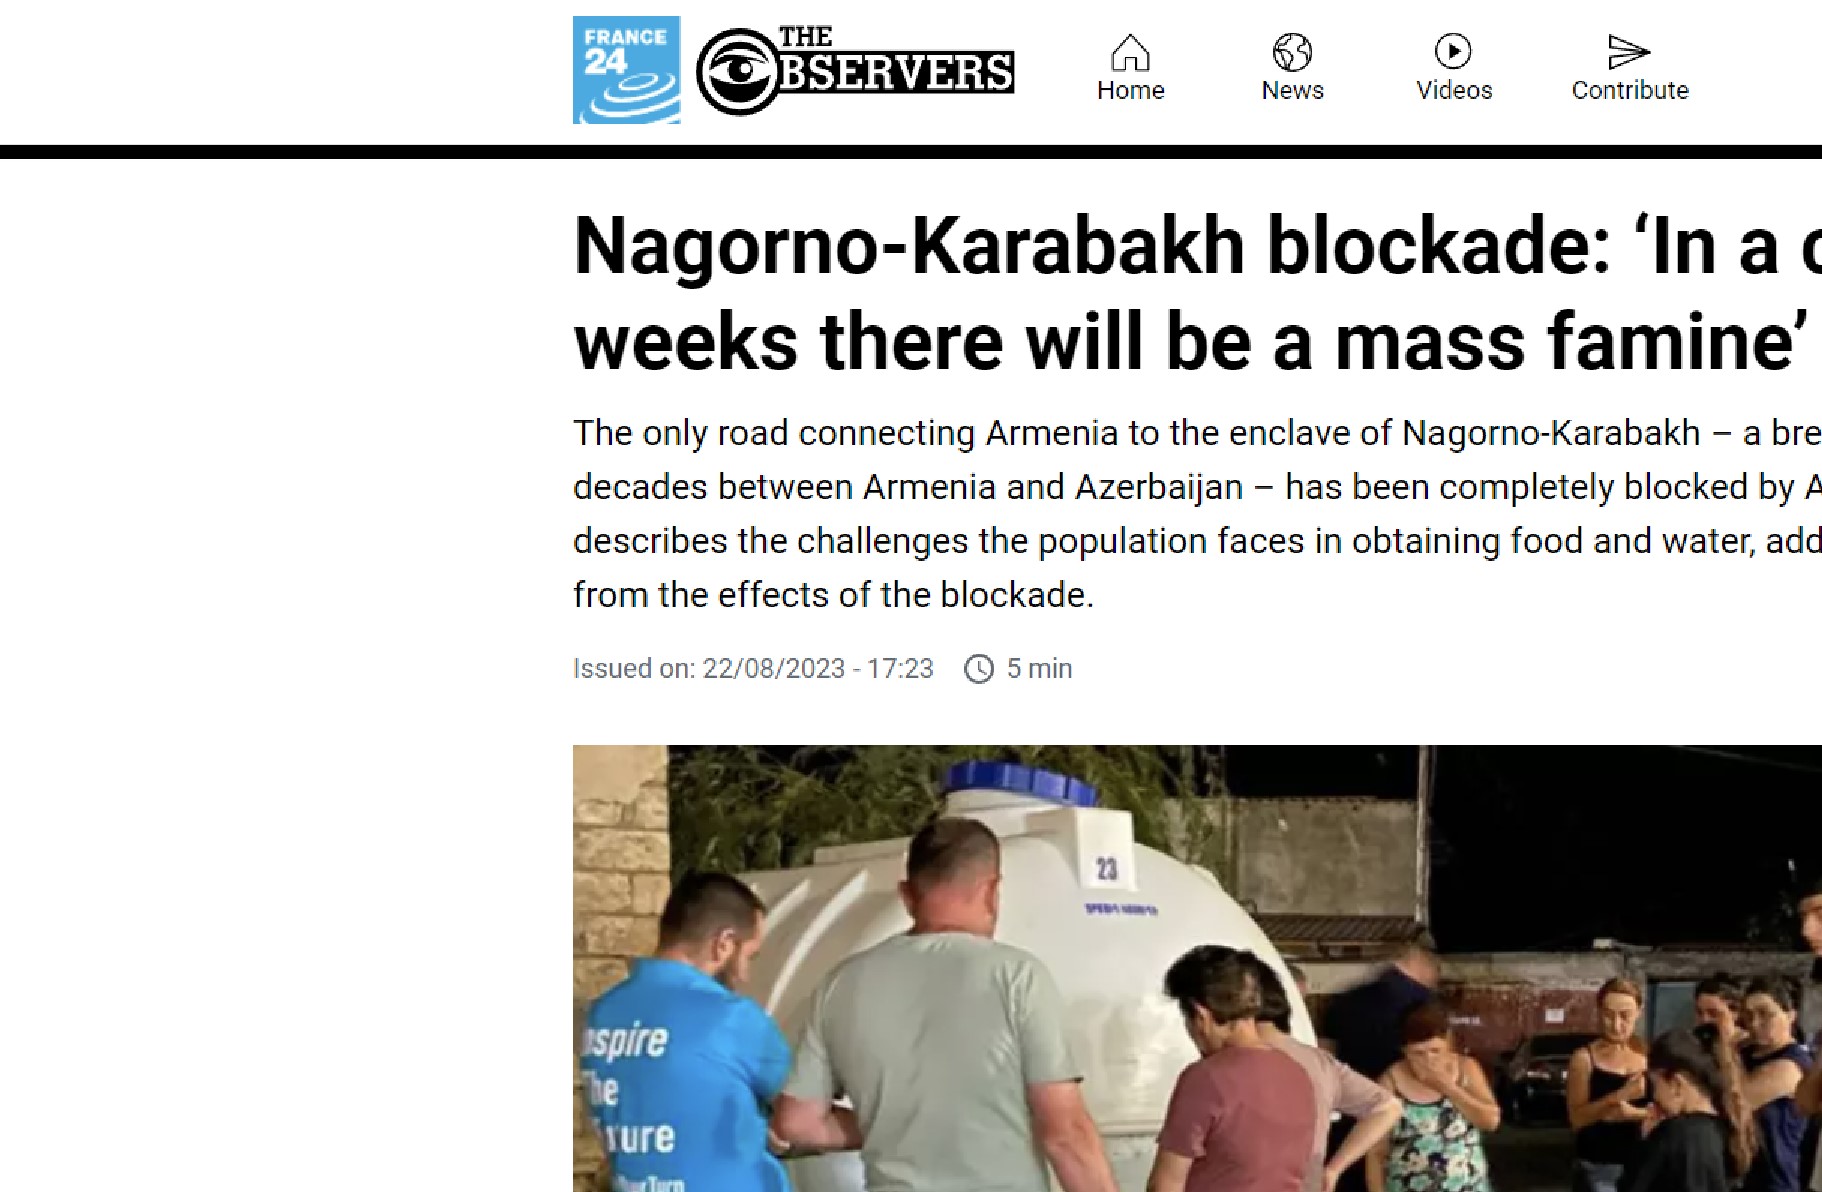 France 24: Nagorno-Karabakh blockade: ‘In a couple of weeks there will be a mass famine’